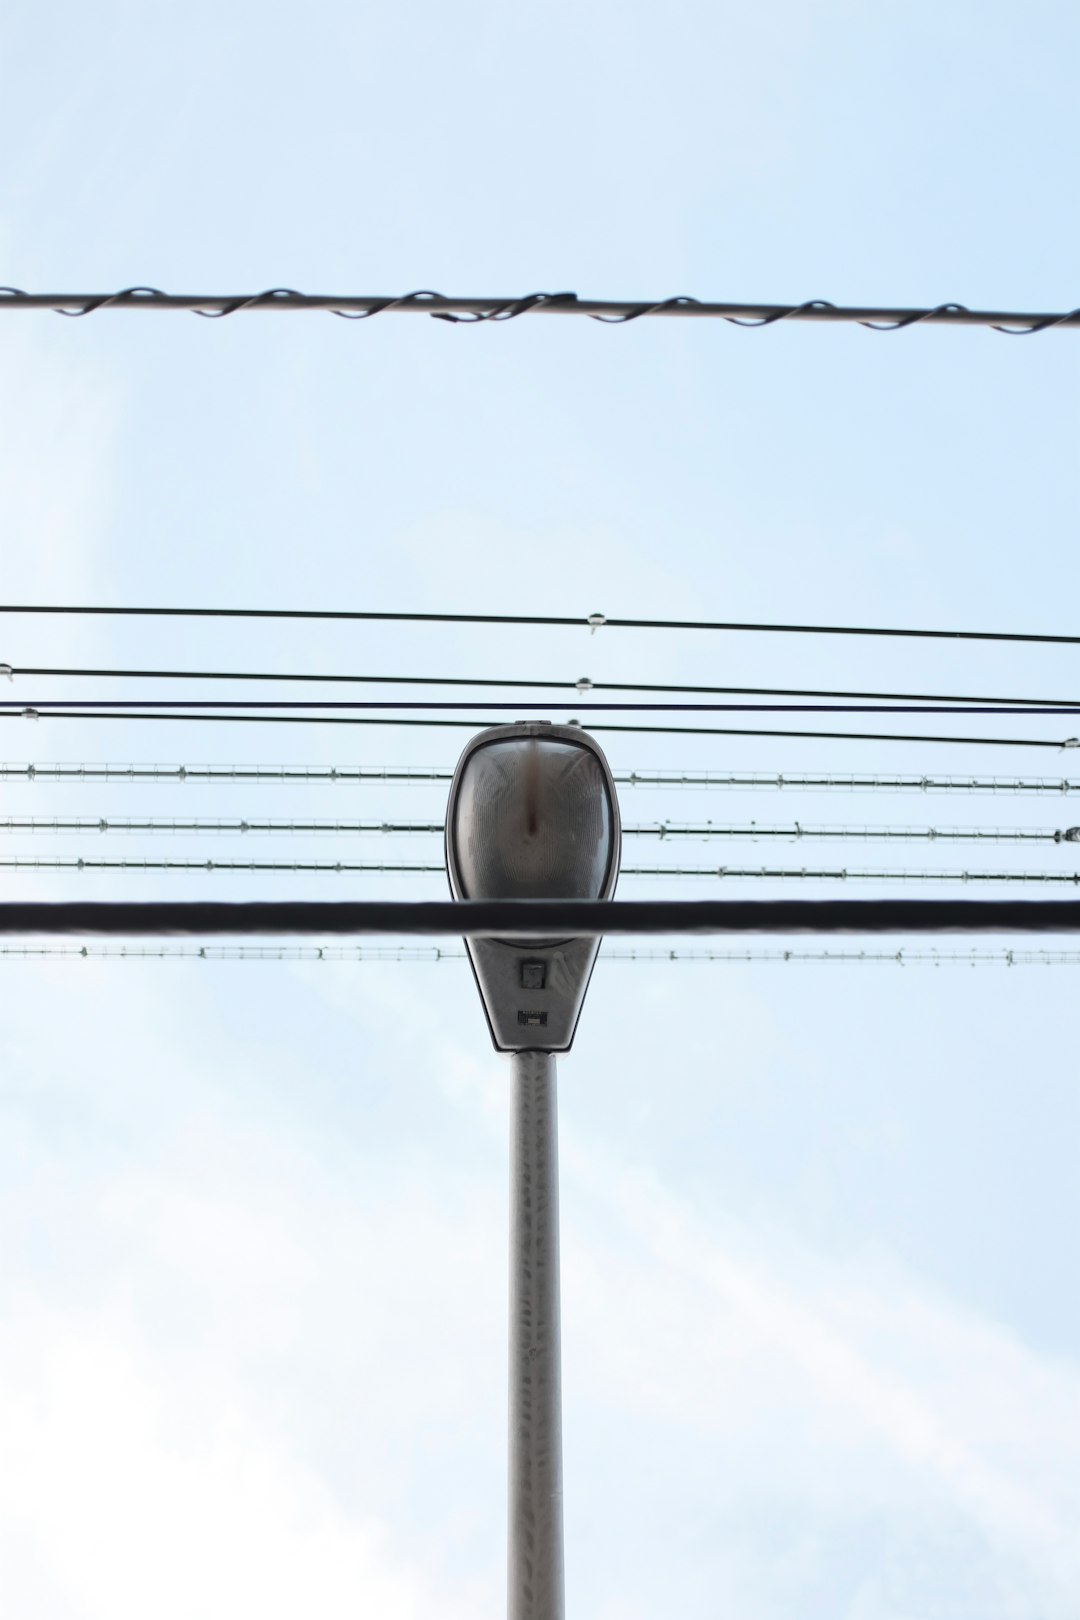 gray metal pole with cable wires during daytiem